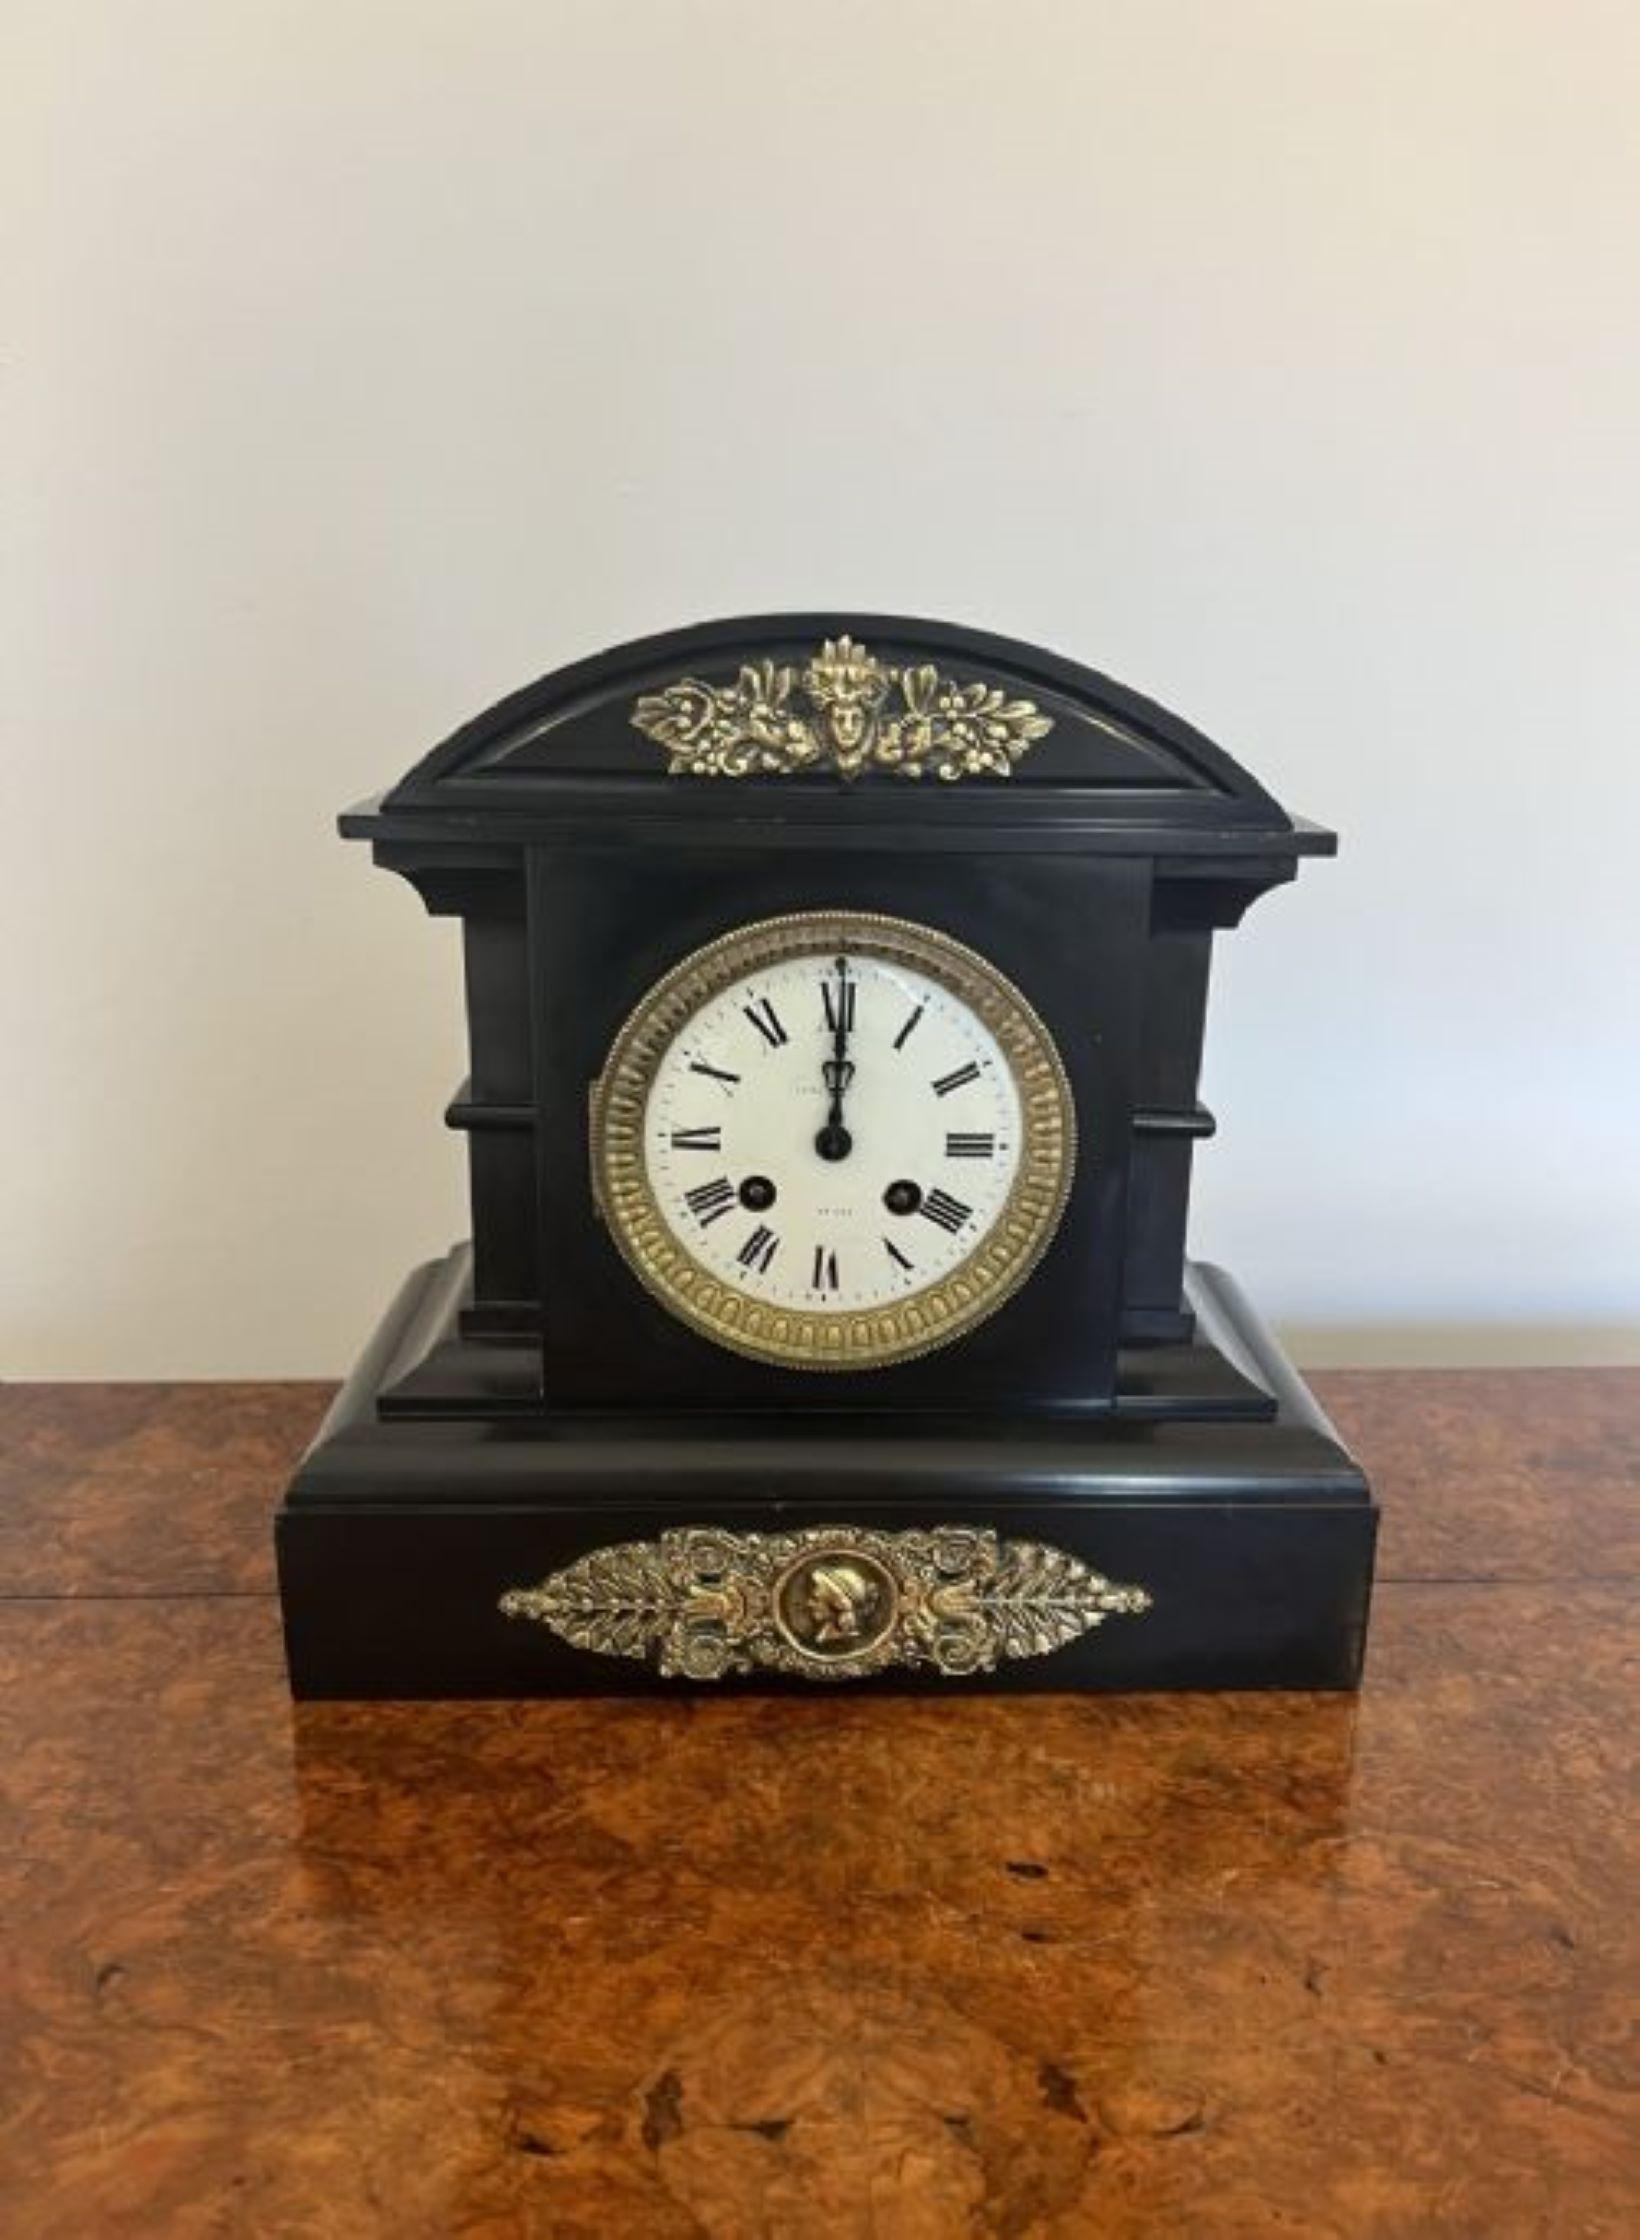 Quality antique Victorian marble and brass eight day striking mantle clock. Having a shaped arched top marble case with quality ornate brass mounts and bezel, porcelain dial with original hands eight day movement striking the hour and half hour on a